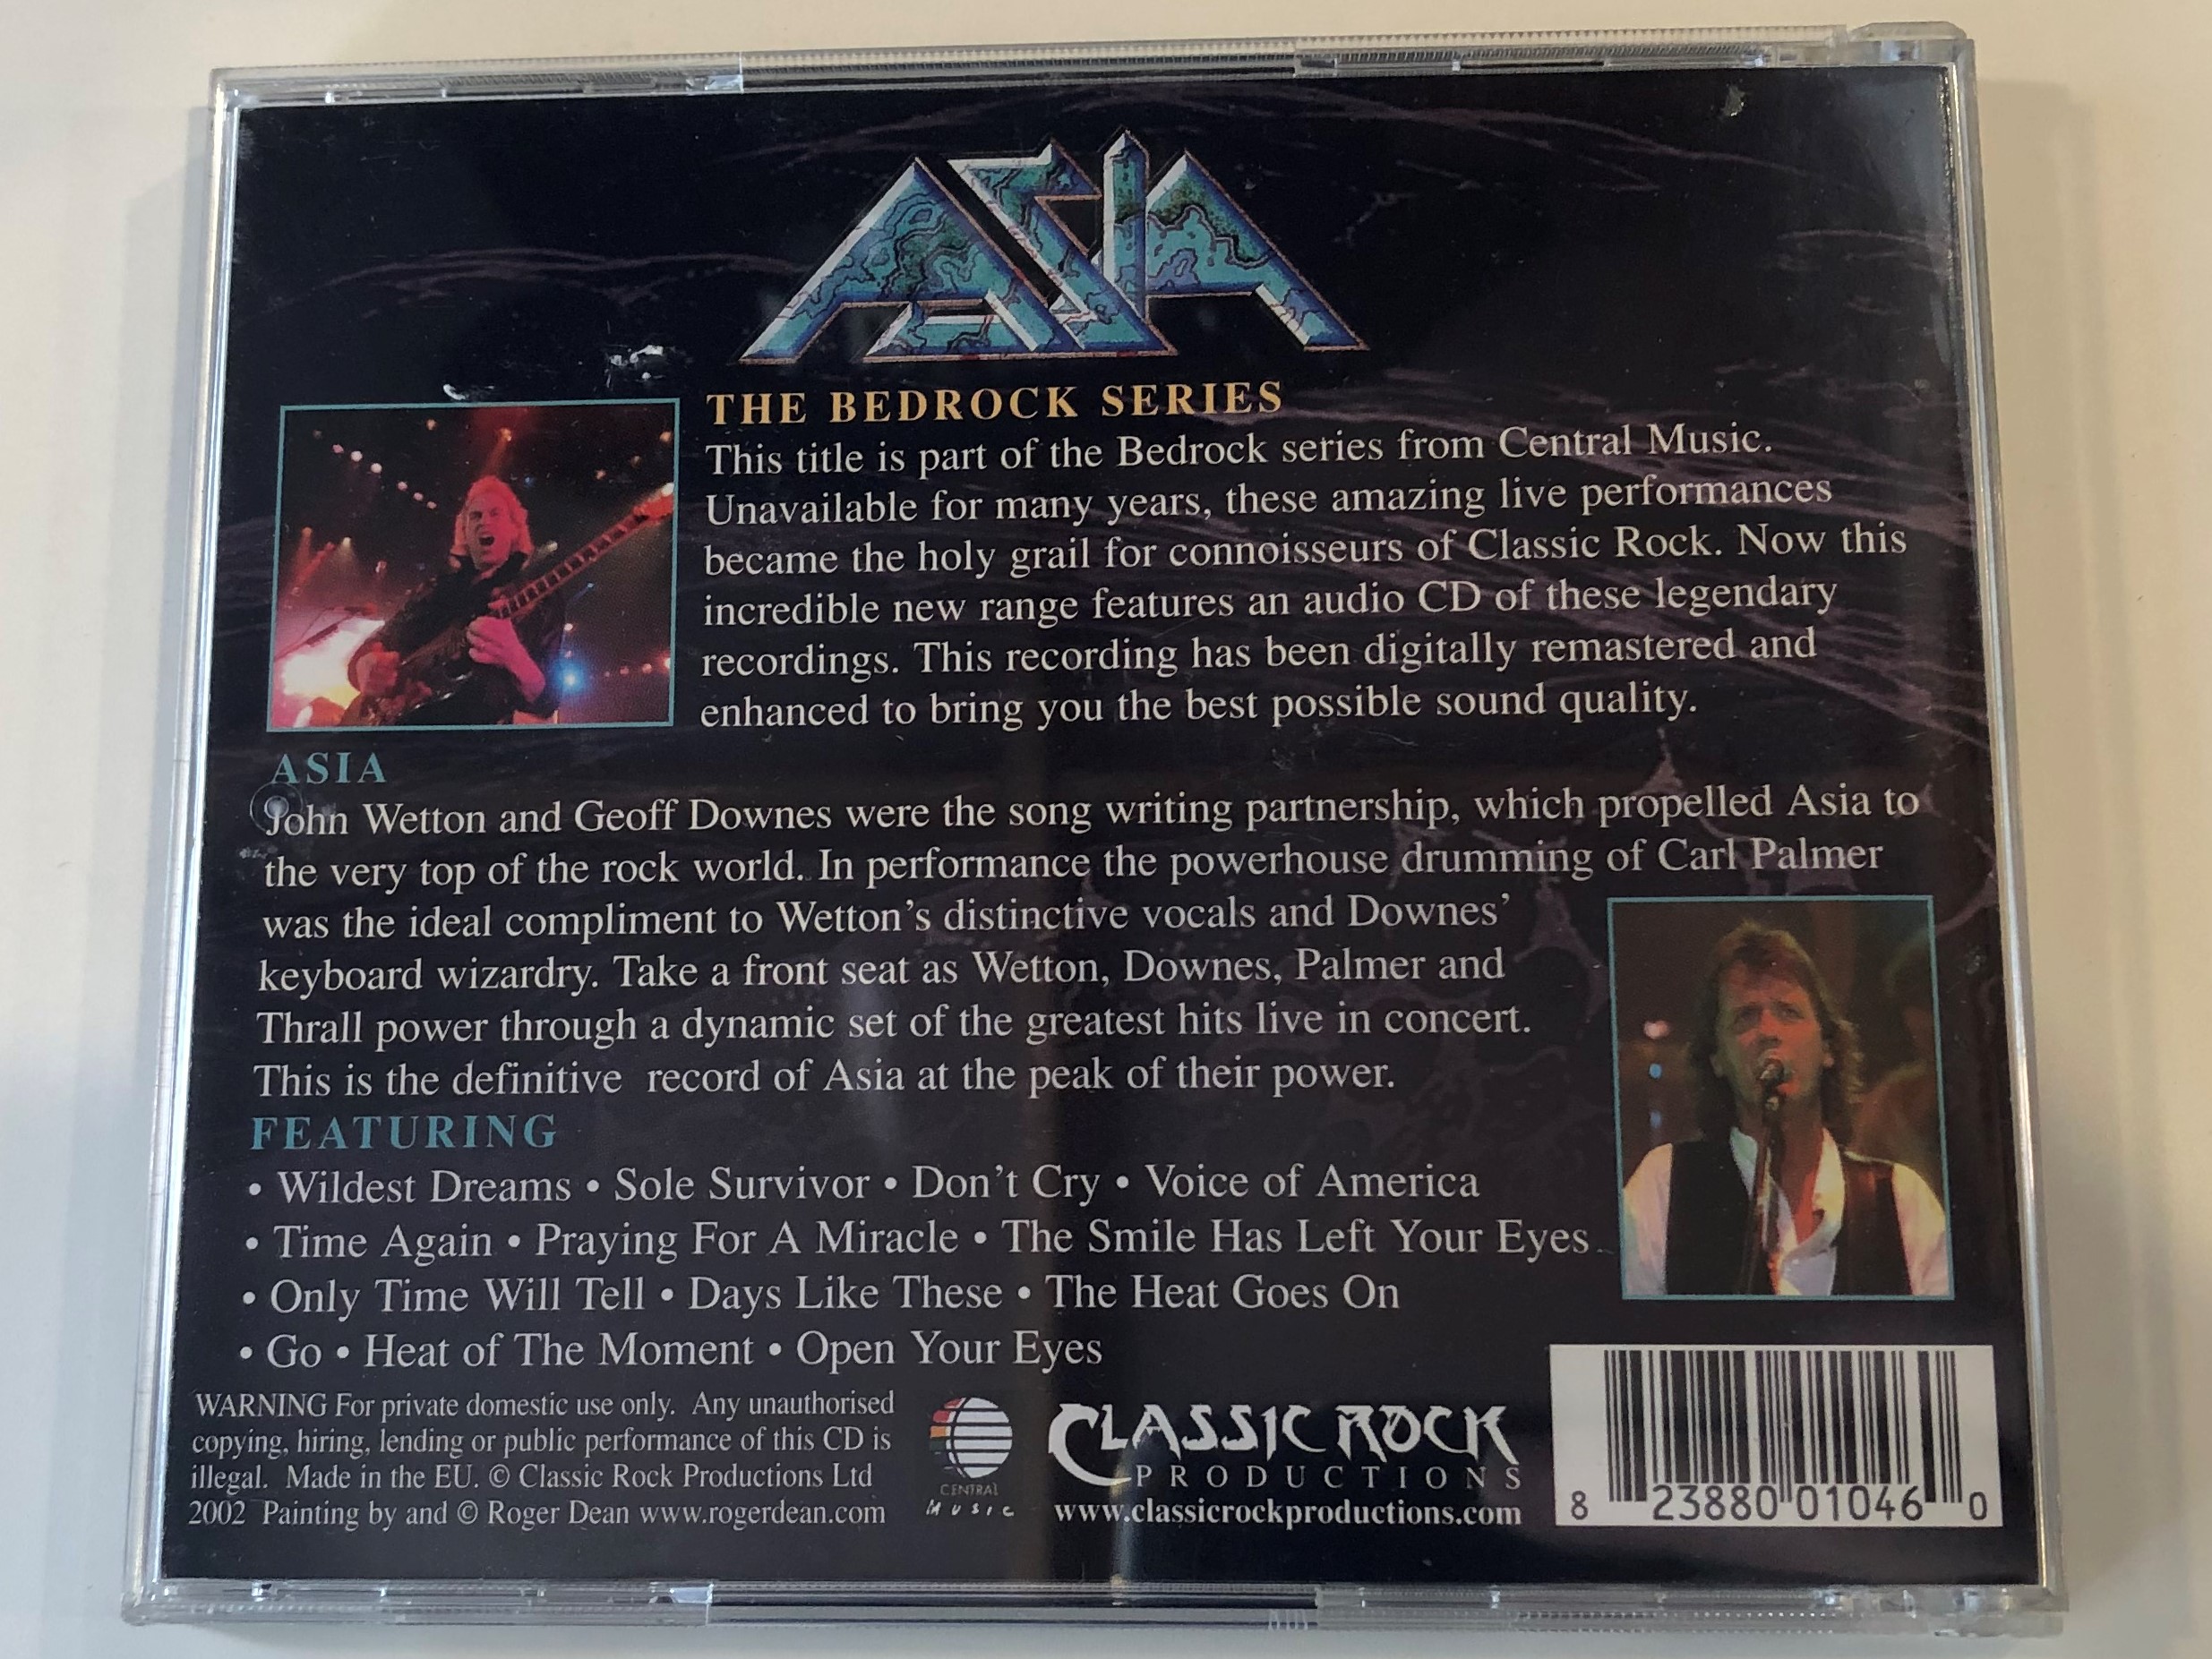 asia-live-in-nottingham-digitally-remastered-for-enhanced-sound-quality-john-wetton-geoff-downes-carl-palmer-pat-thrall-classic-rock-productions-audio-cd-2002-823880010460-4-.jpg